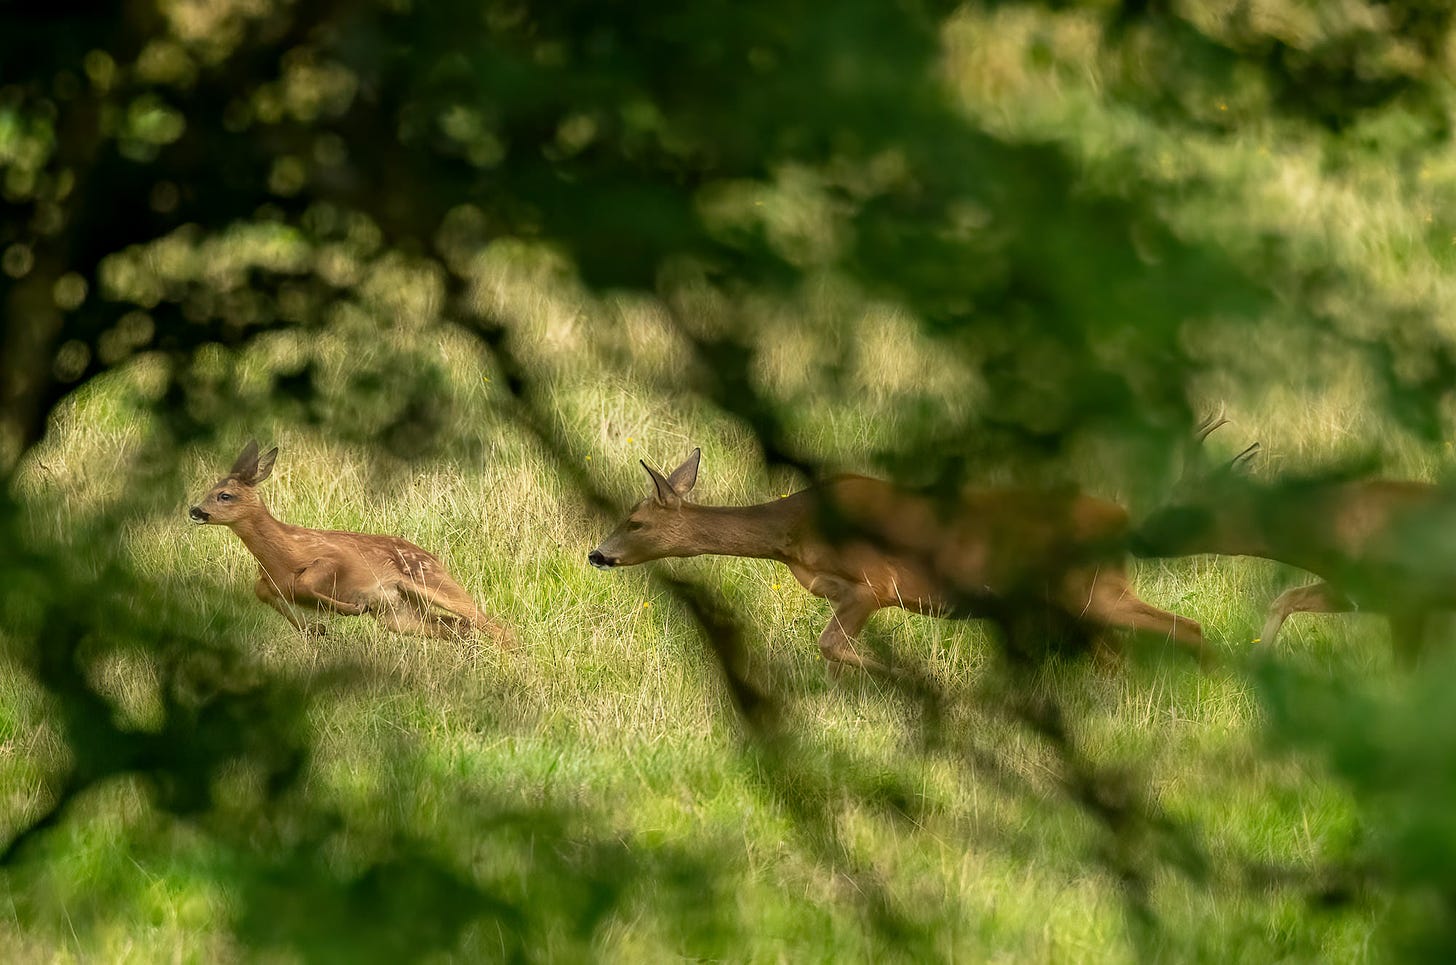 Photo of a roe deer kid being chased by its mother and a buck, photographed by Rhiannon Law